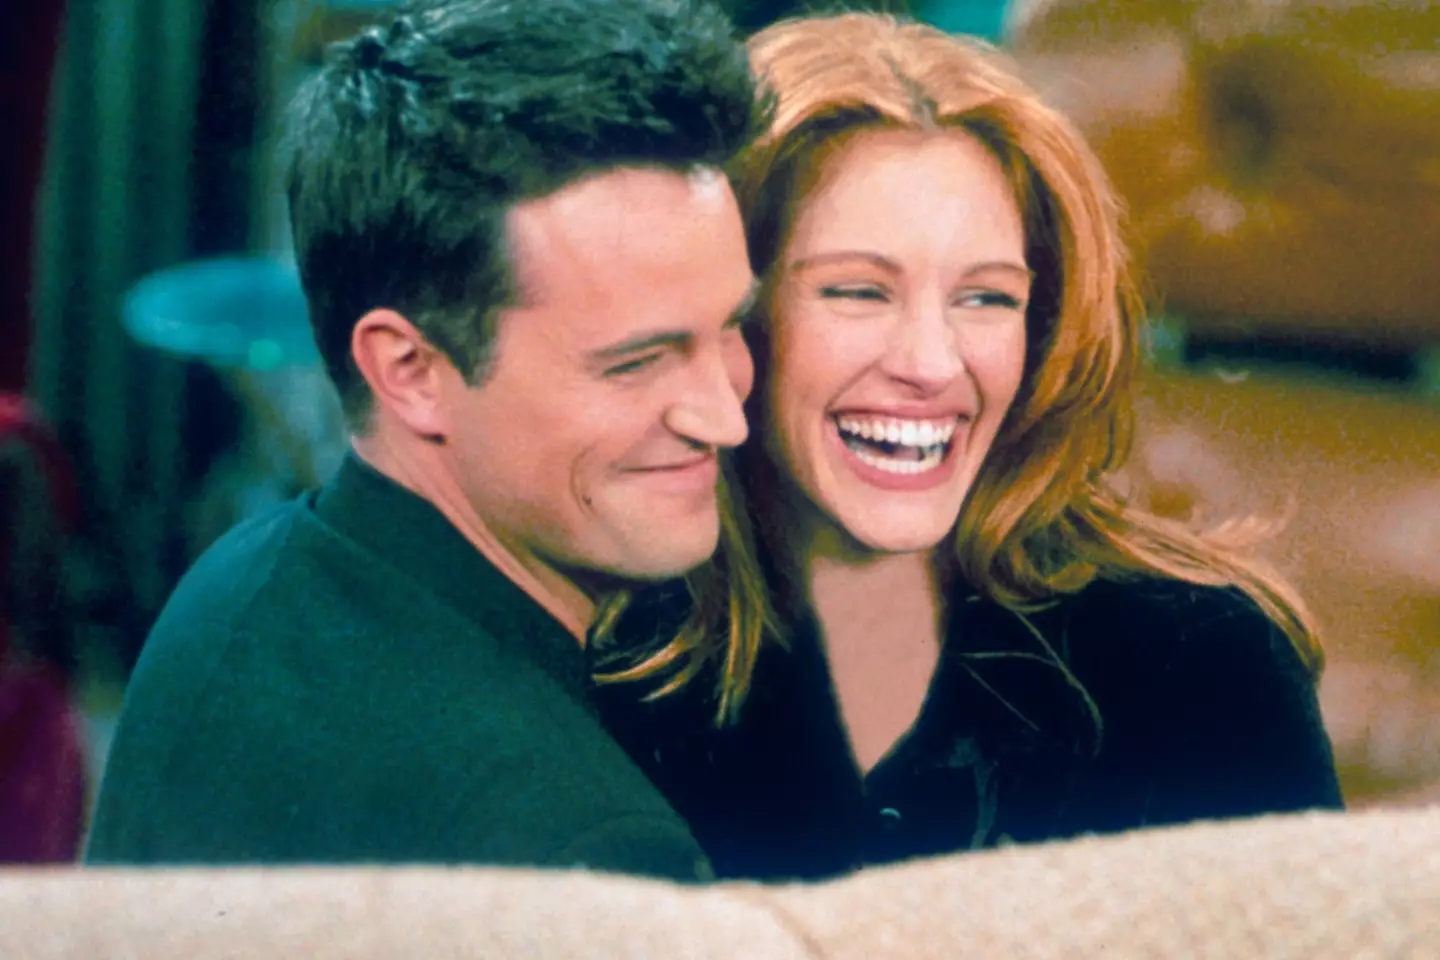 Matthew Perry's Chandler Bing hit it off with an old school friend Susie, played by Julia Roberts on Friends.